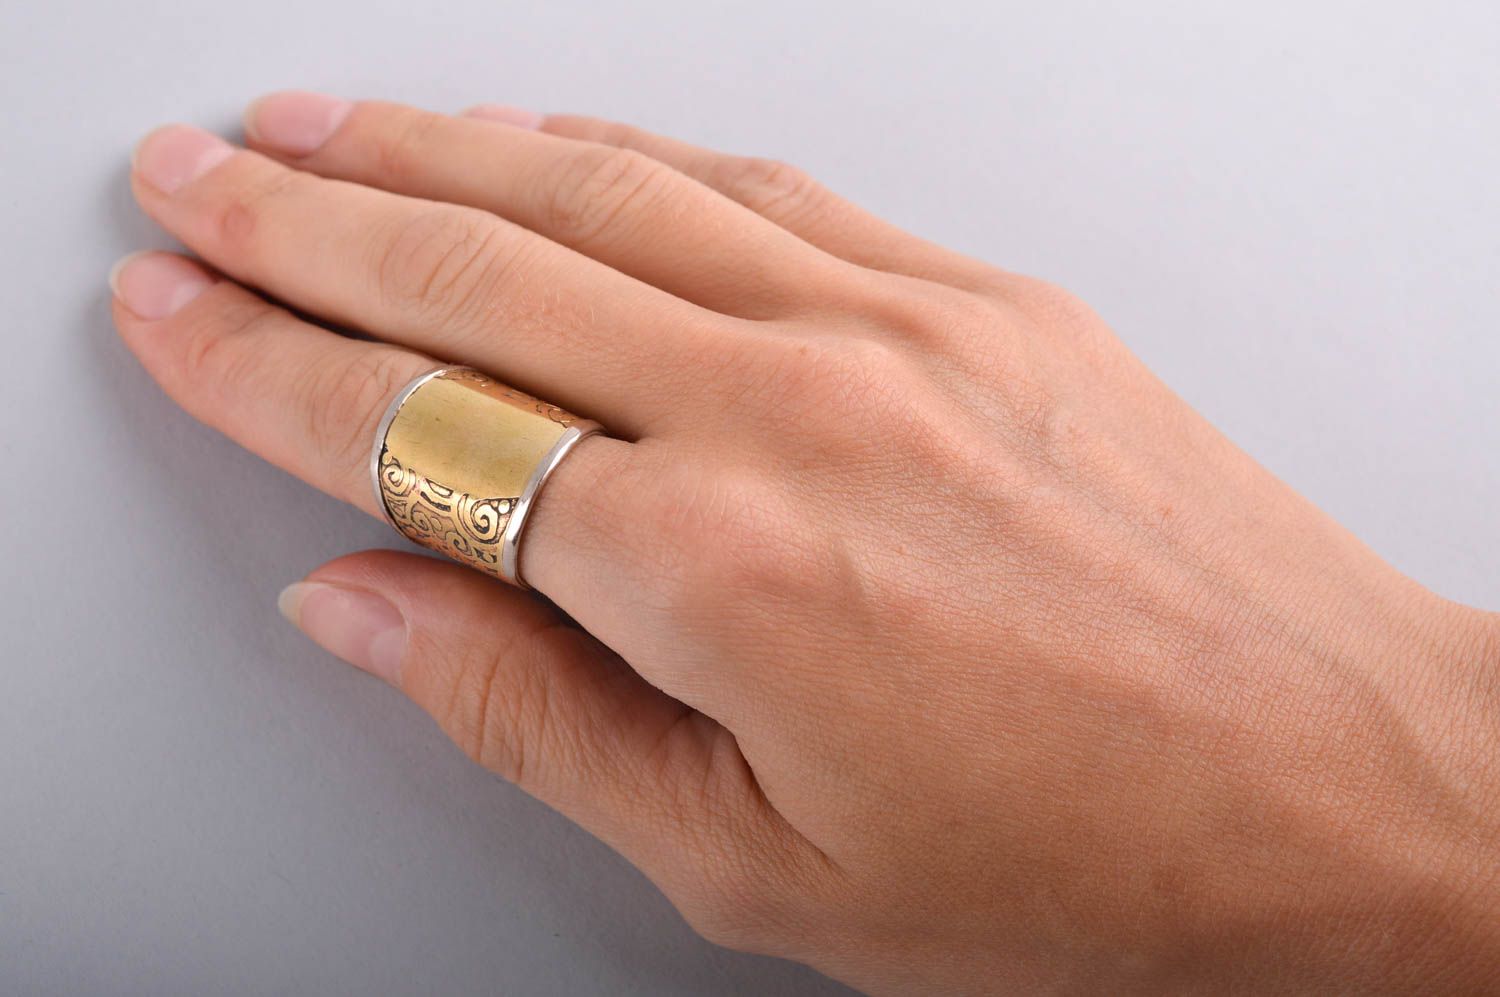 Designer ring unusual gift for women metal accessory brass ring gift ideas photo 5